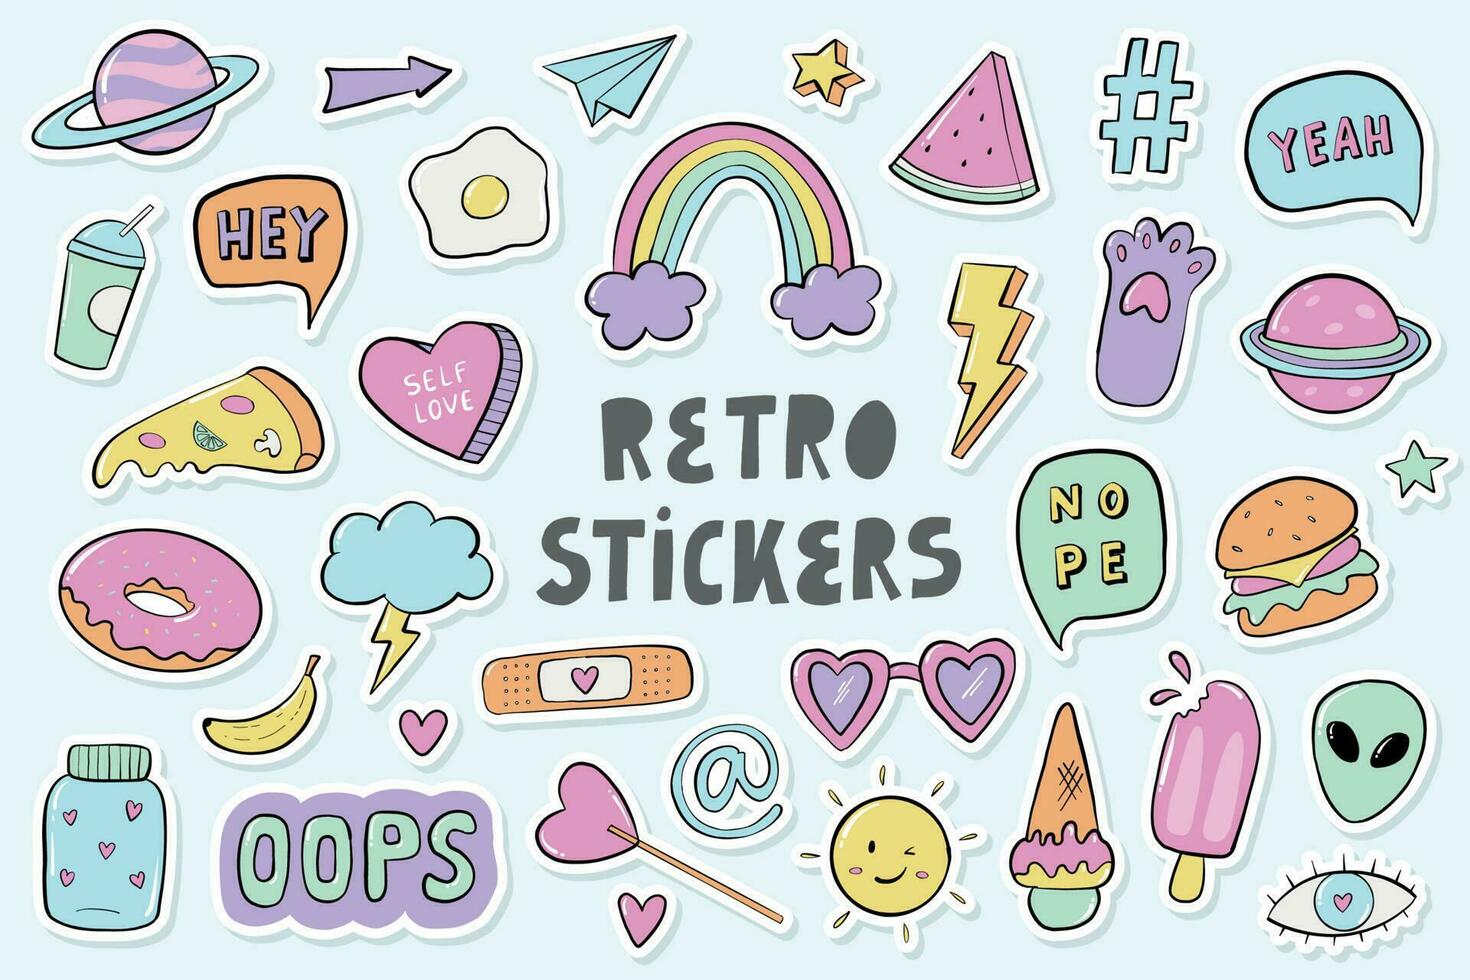 set of cute retro stickers, hand drawn crtoon elements, doodles with white edge. Good for planners, scrapbooking, prints, sublimation, stationary, etc. EPS 10 vector